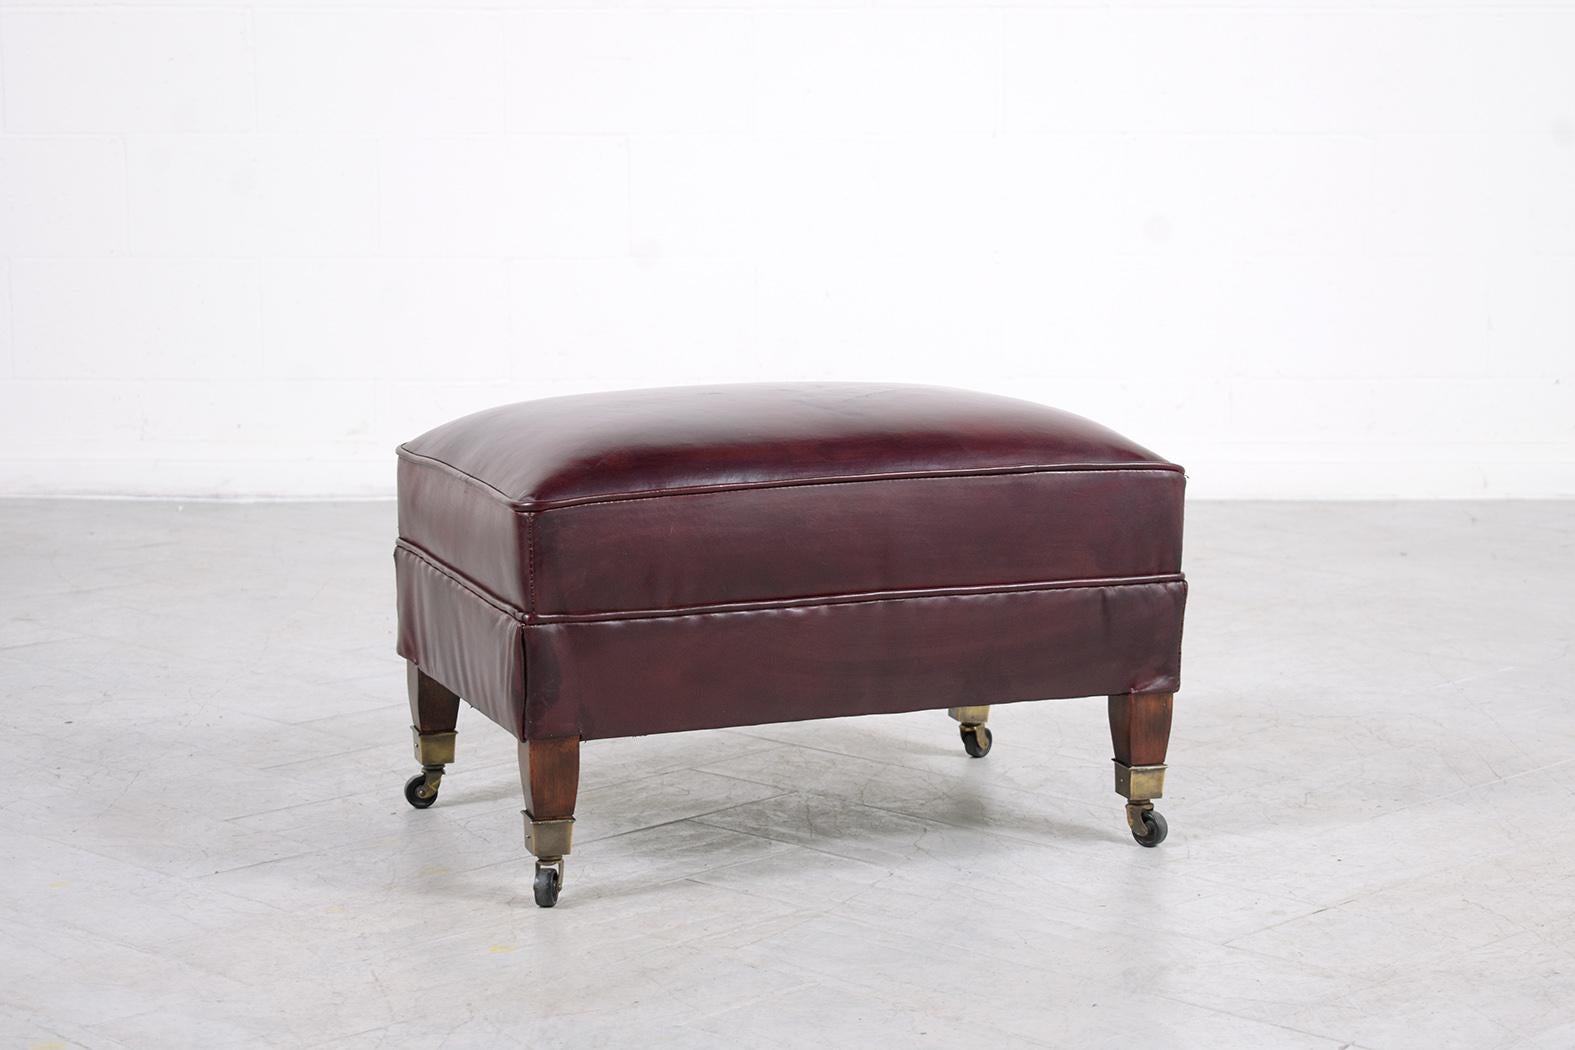 Antique English Chesterfield Lounge Chair: Cordovan Red Leather Tufted Design For Sale 8